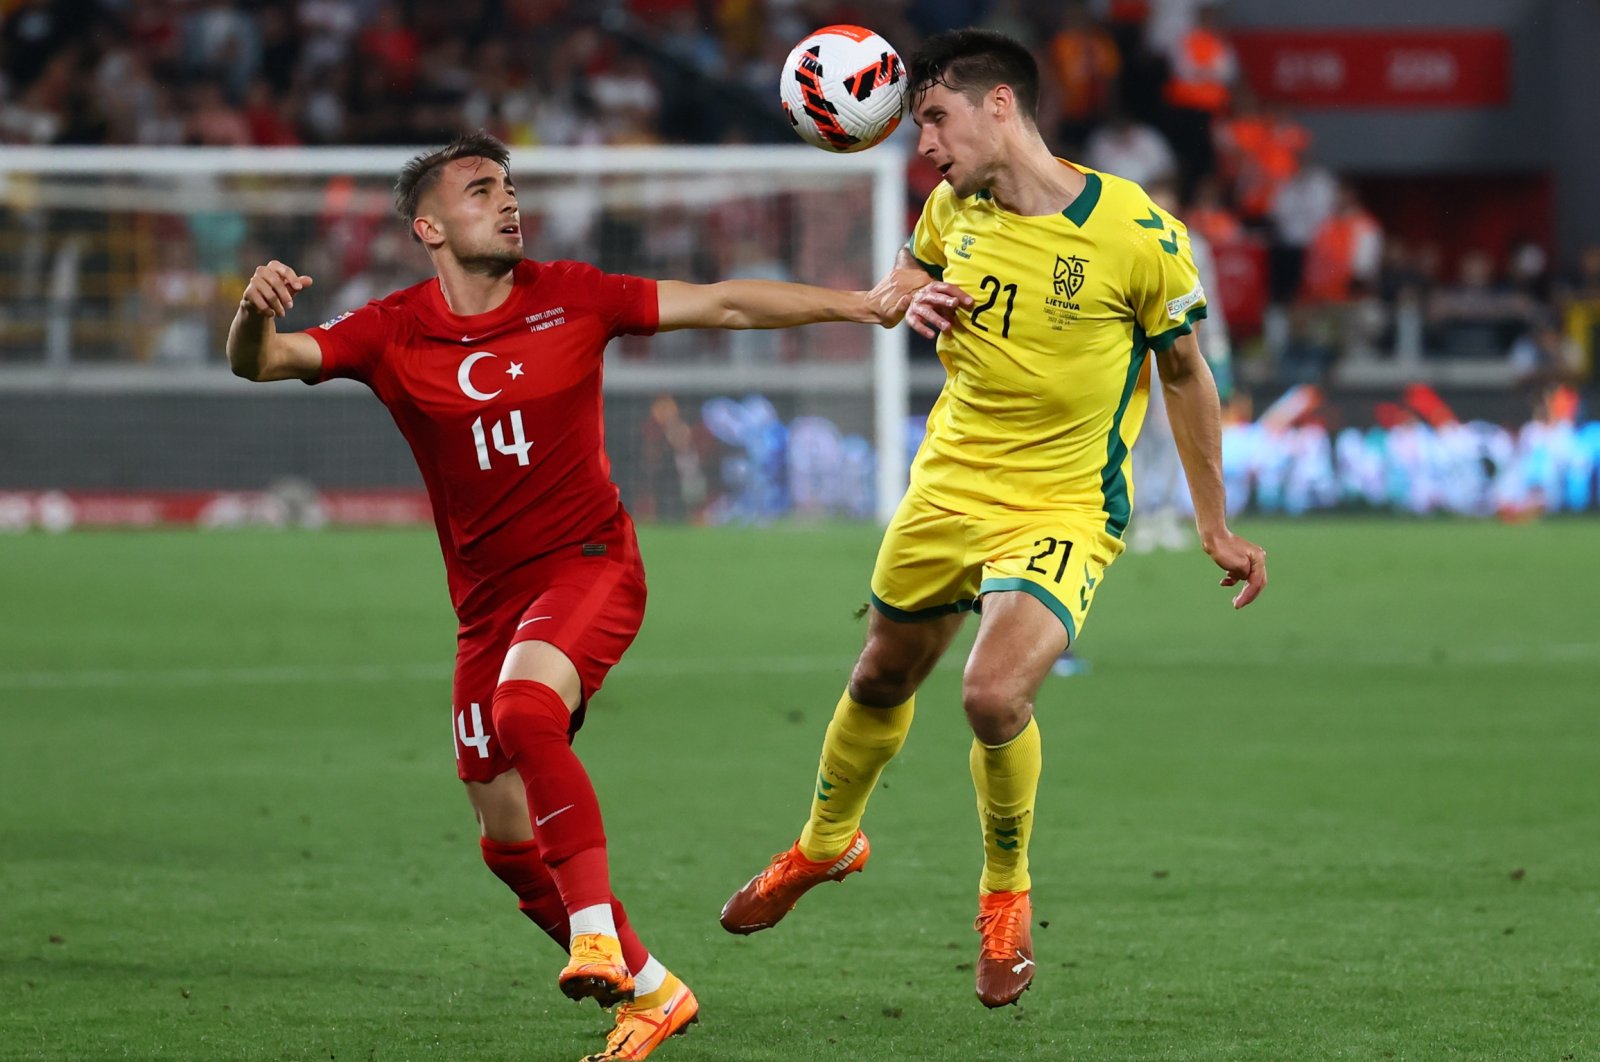 National team player Yunus Akgün (L) vies for the ball against Lithuania&#039;s Dominykas Barauskas during the UEFA Nations League match in Gürsel Aksel Stadium, Izmir, Turkey, June 14, 2022. (AA Photo)